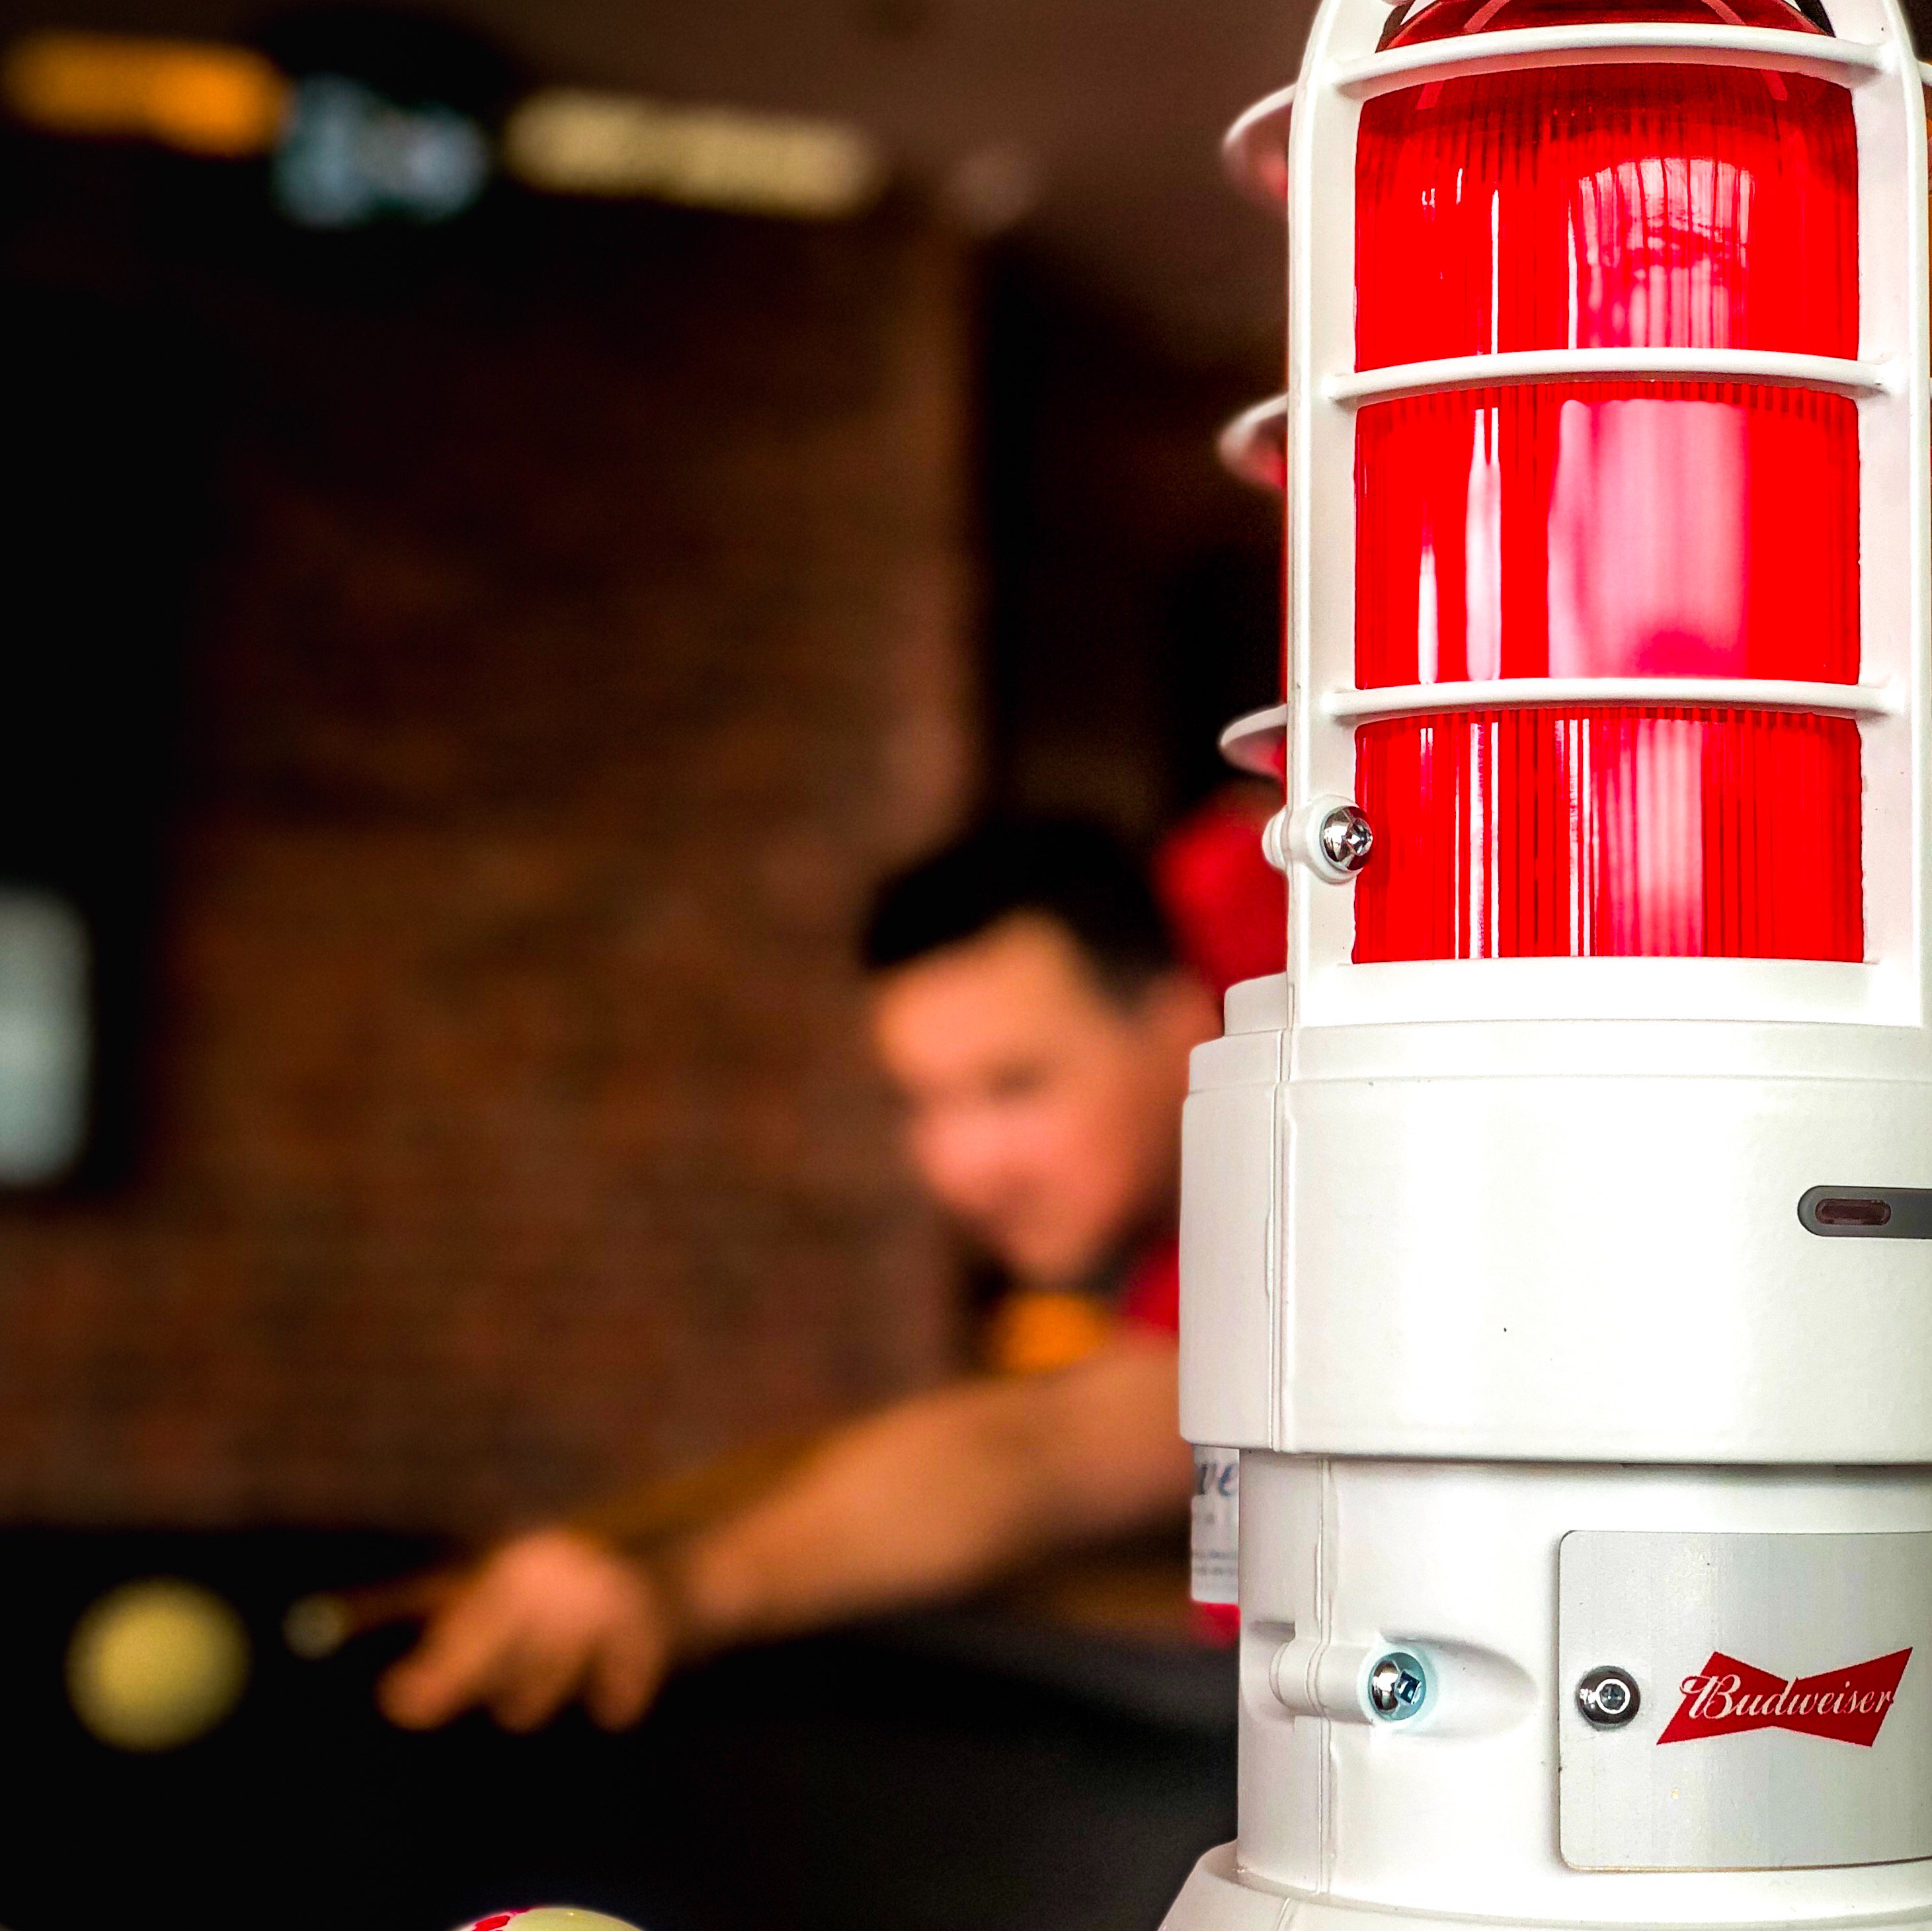 Big Red Budweiser Goal Light arrives to celebrate Montreal as King